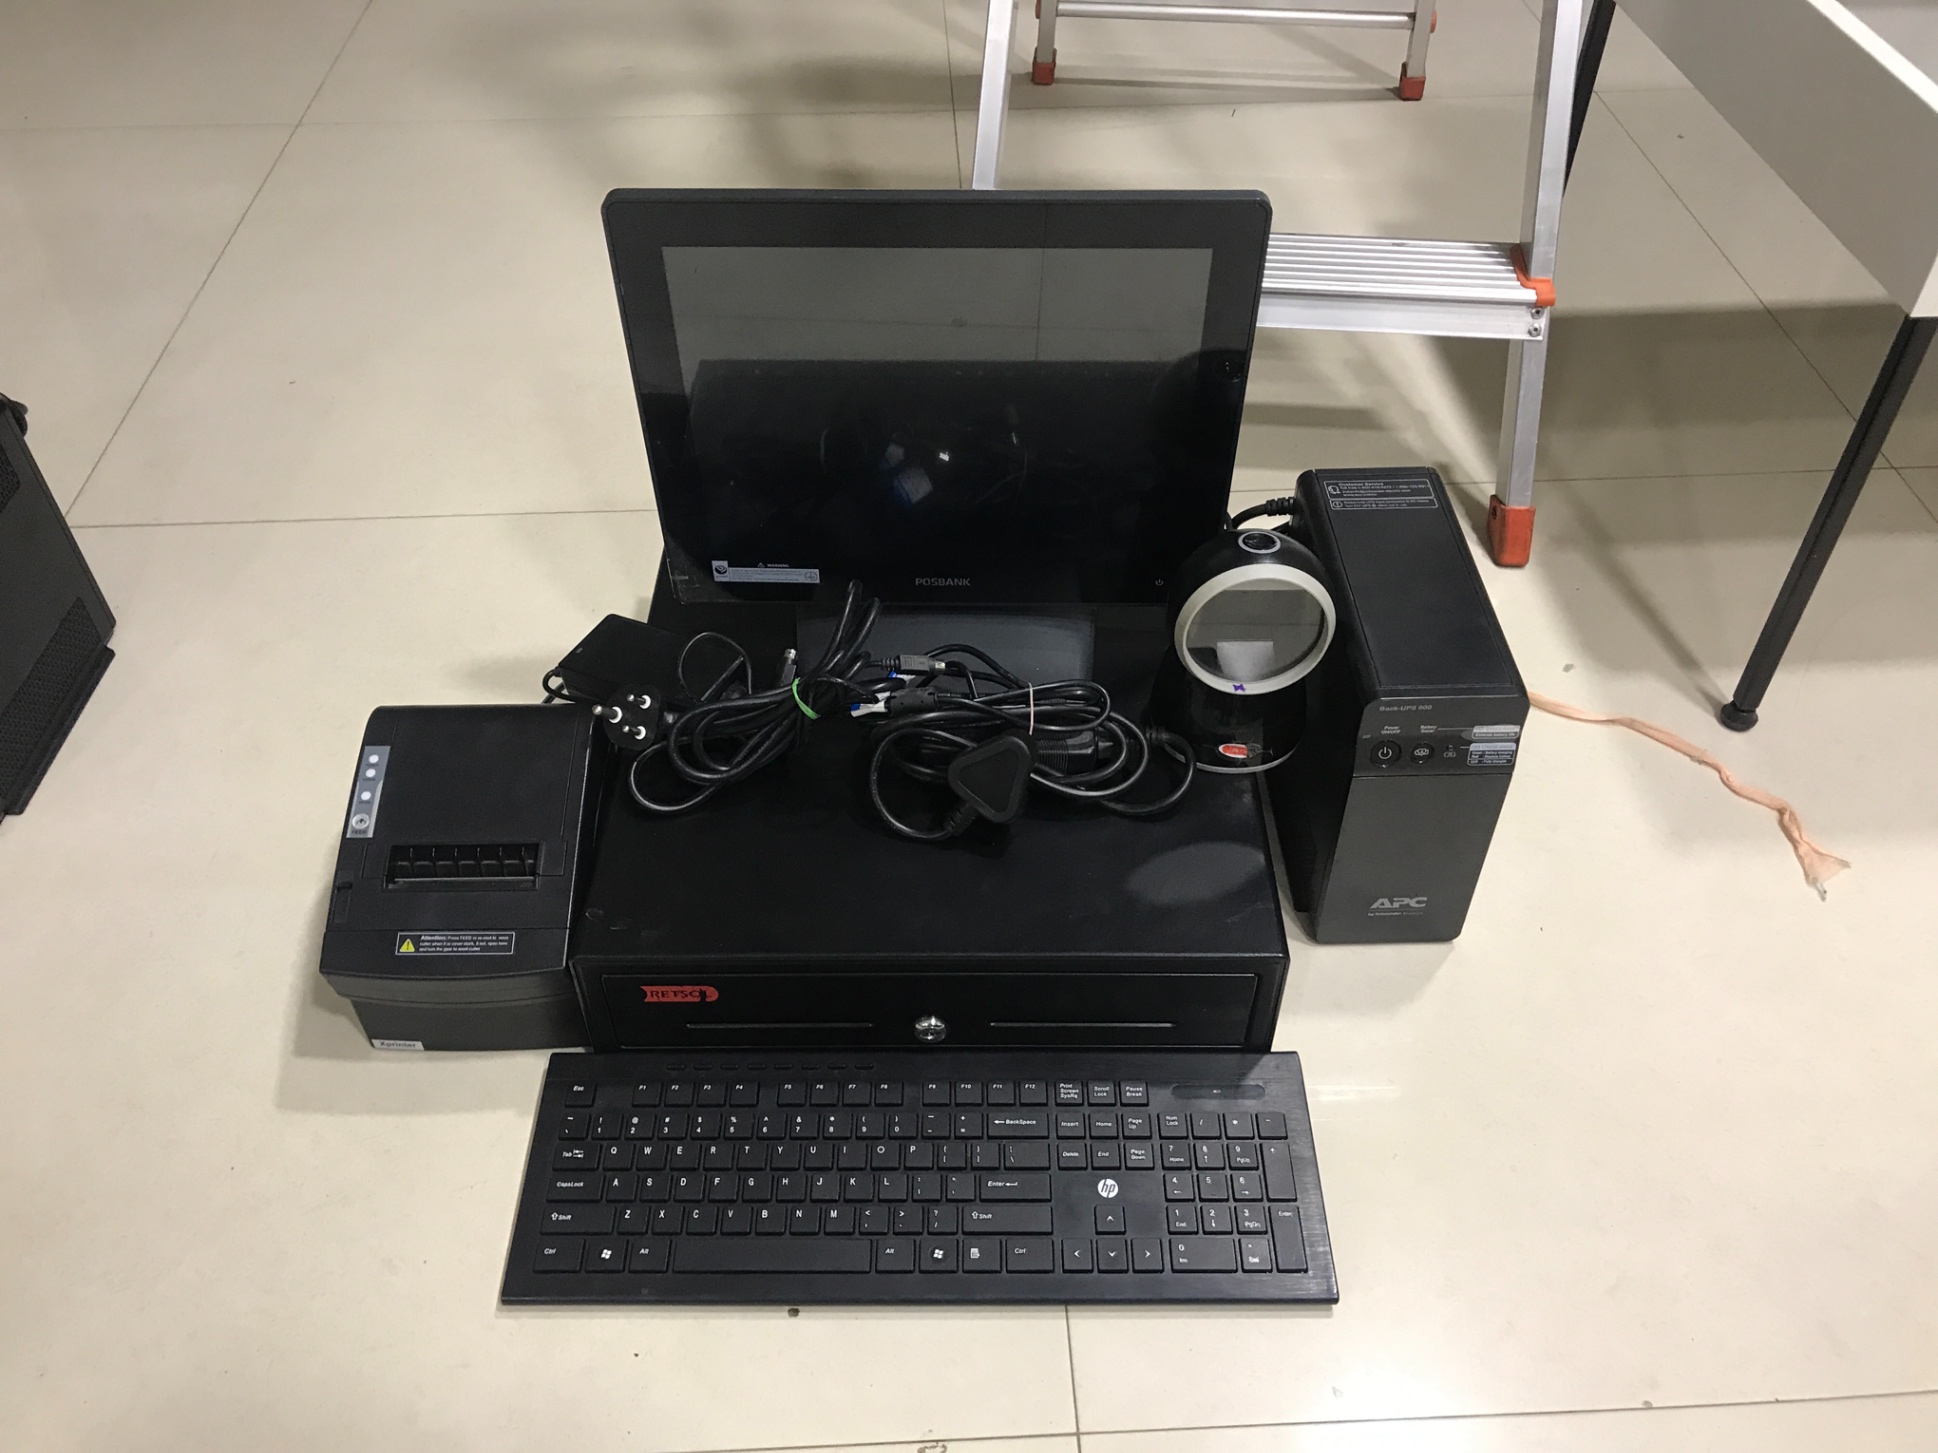 Computers/ Mobile/ Electronics and accessories for sale; Like New condition